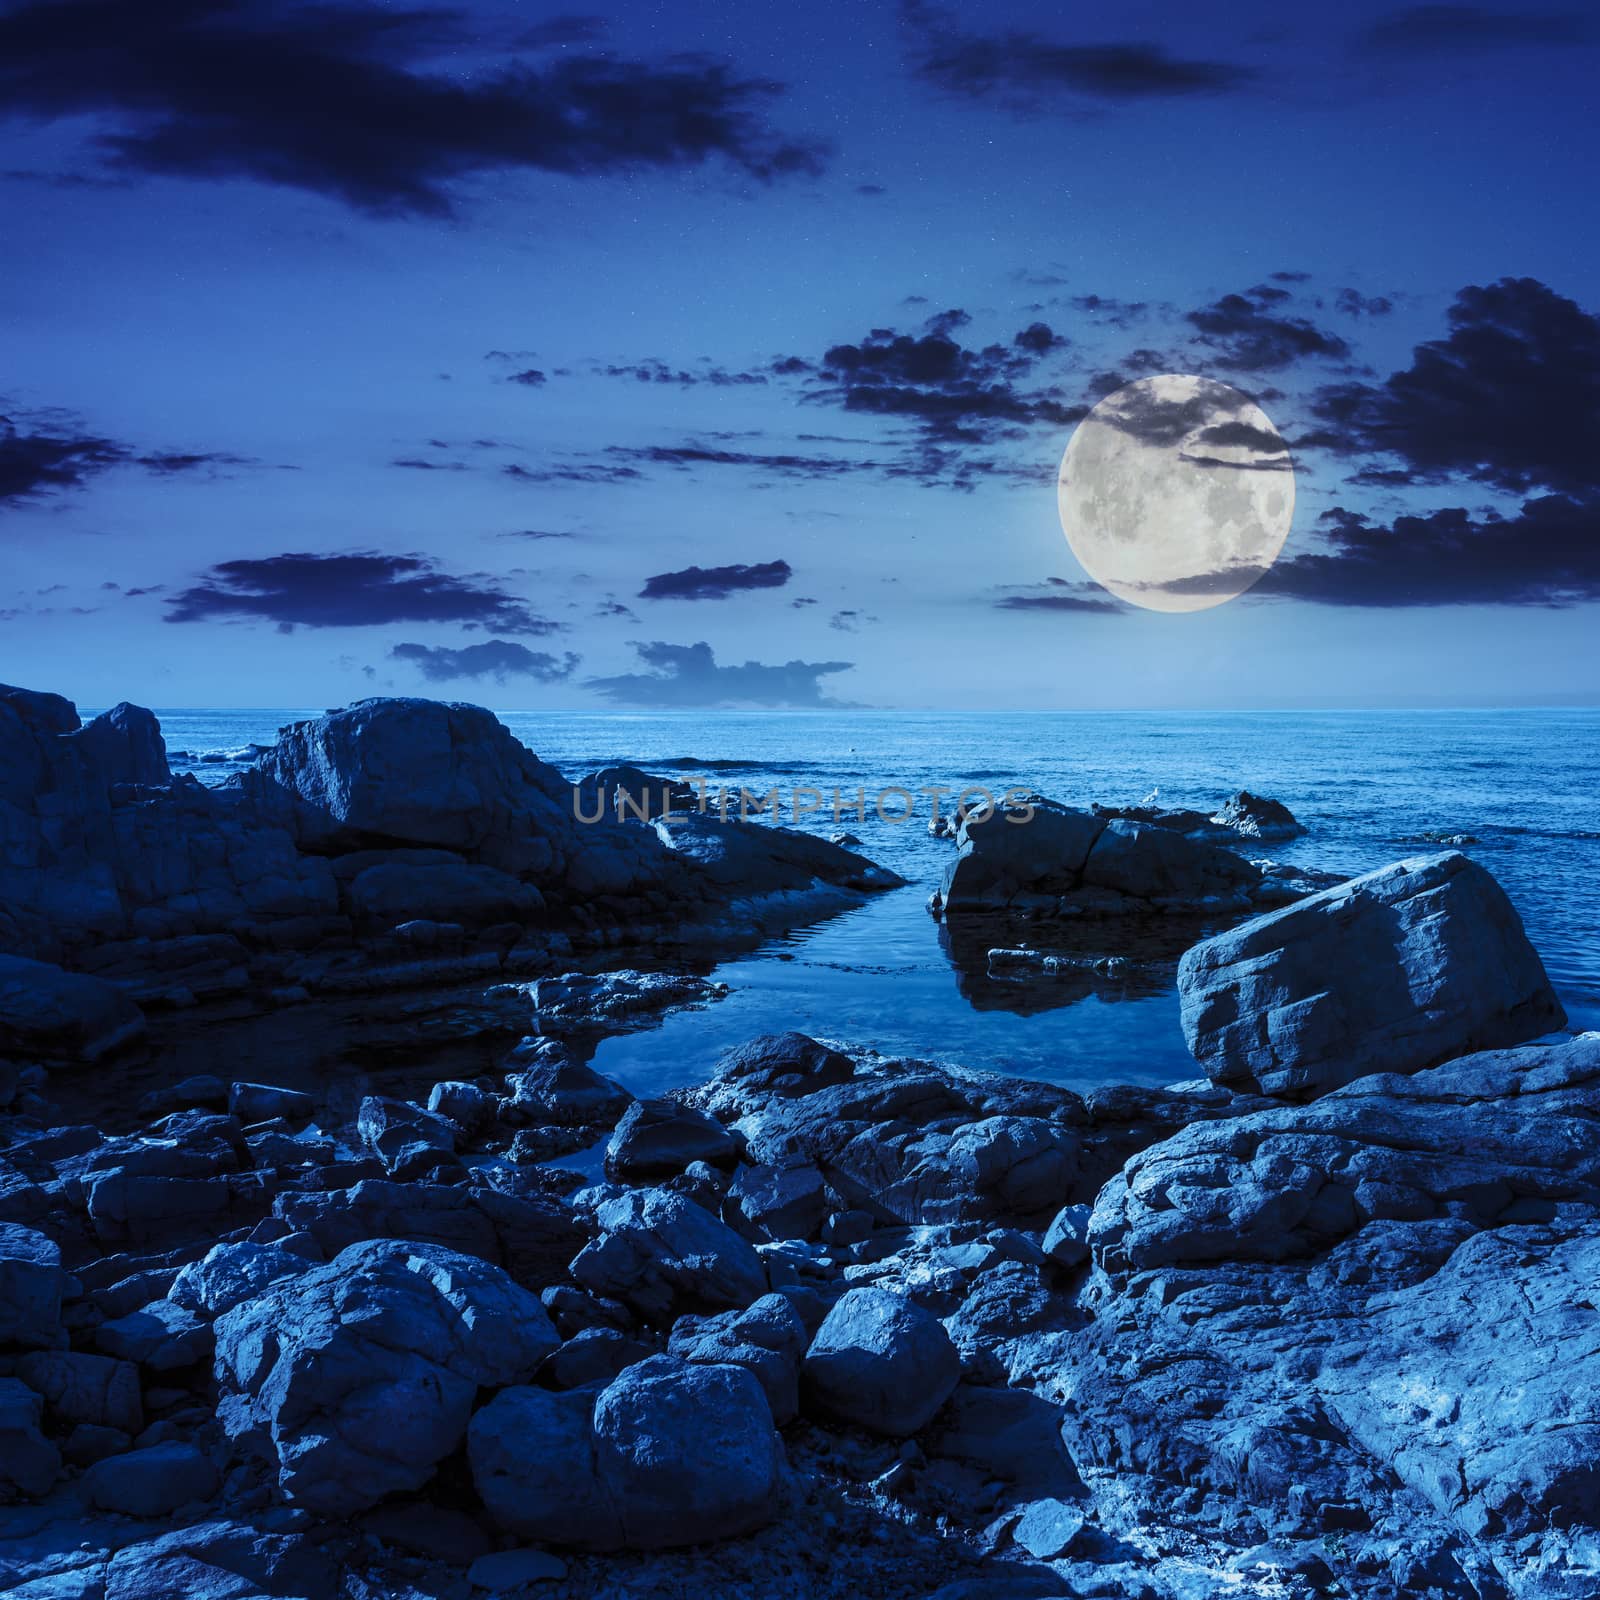 calm sea wave on rocky shore at night by Pellinni